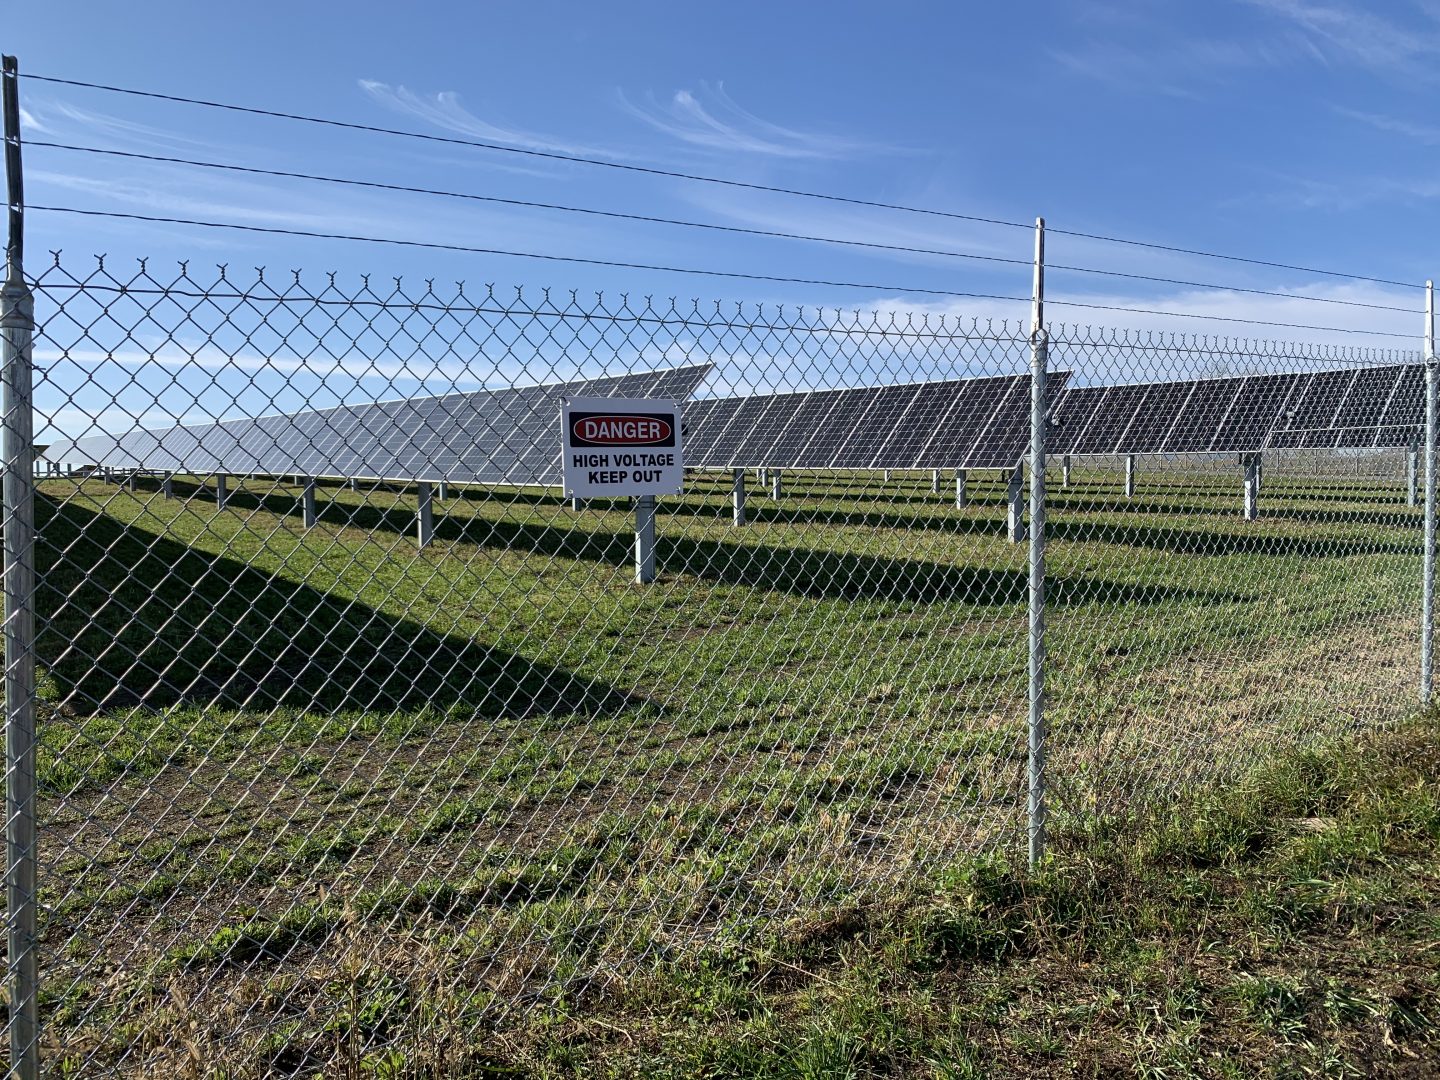 The Nittany 1 Solar Farm, seen here from outside protective fencing in Lurgan Township, Franklin County on Nov. 24, 2020.